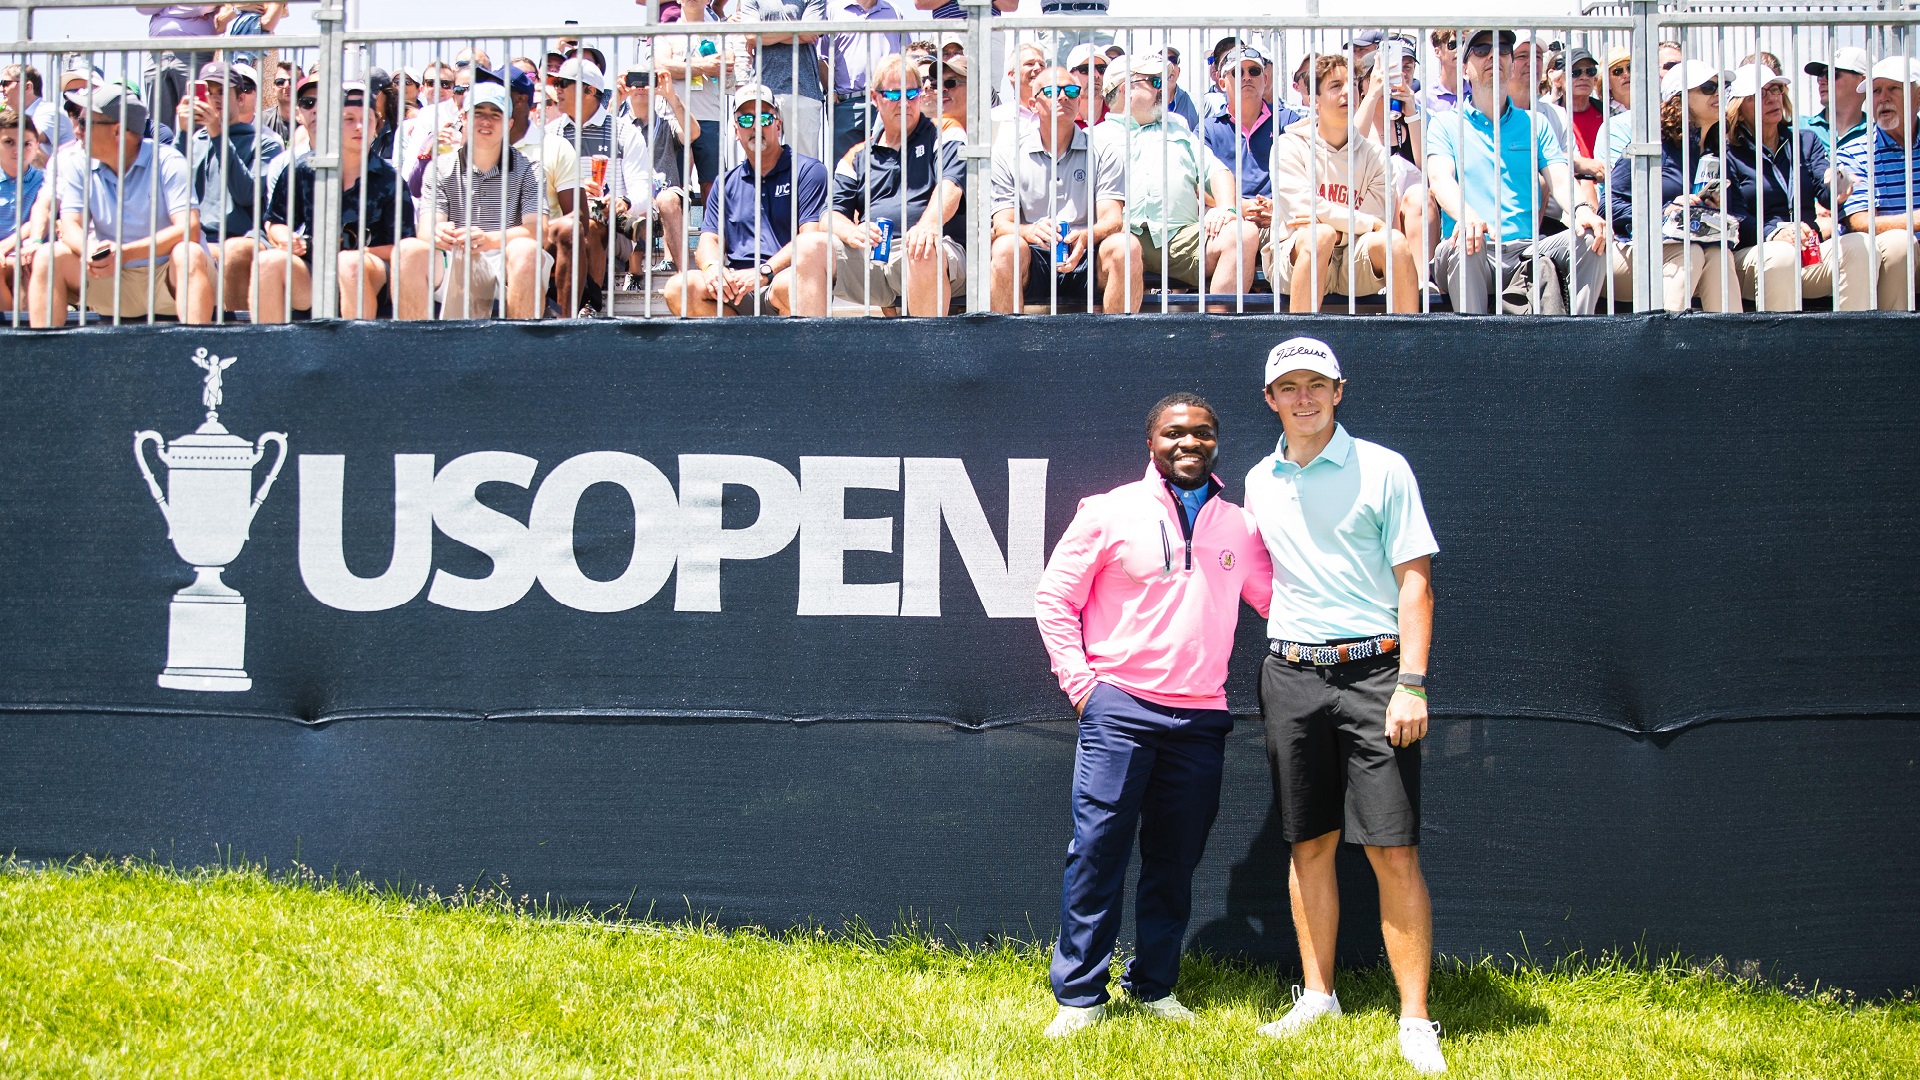 Broad students Darryl Ervin and James Pion pose in front of a crowd at the US Open.